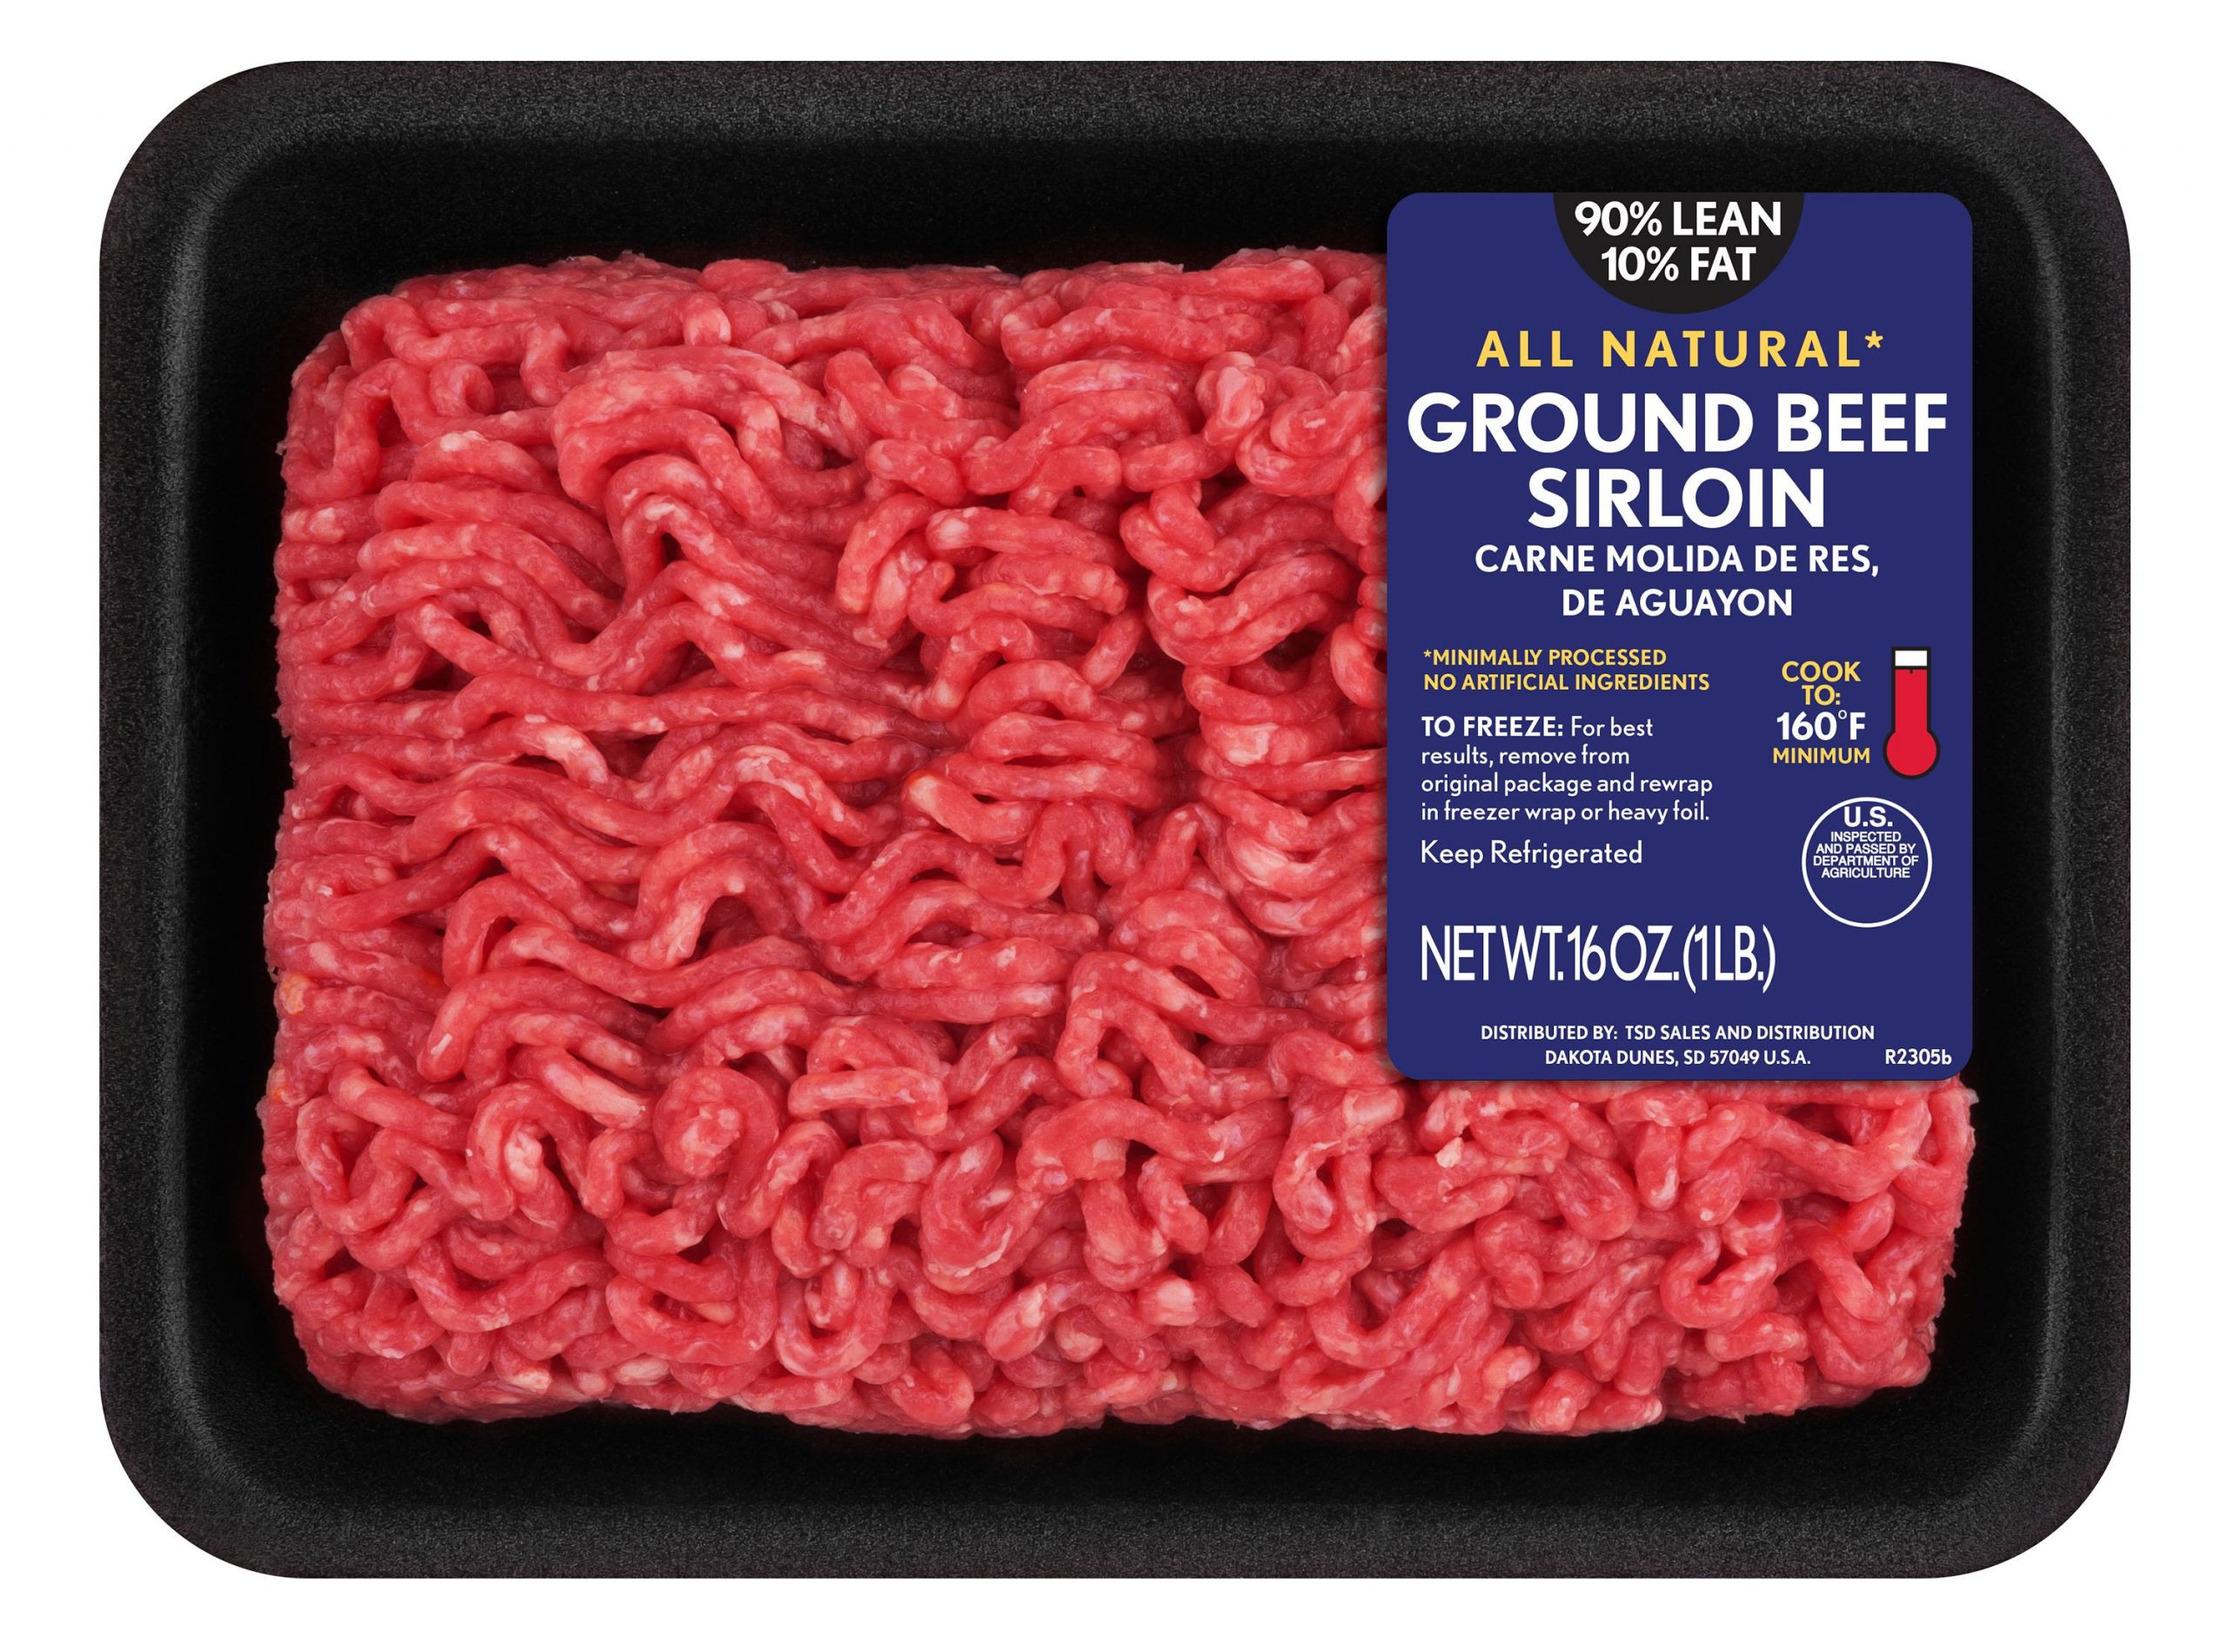 The 15 Best Ideas for Ground Beef Sirloin